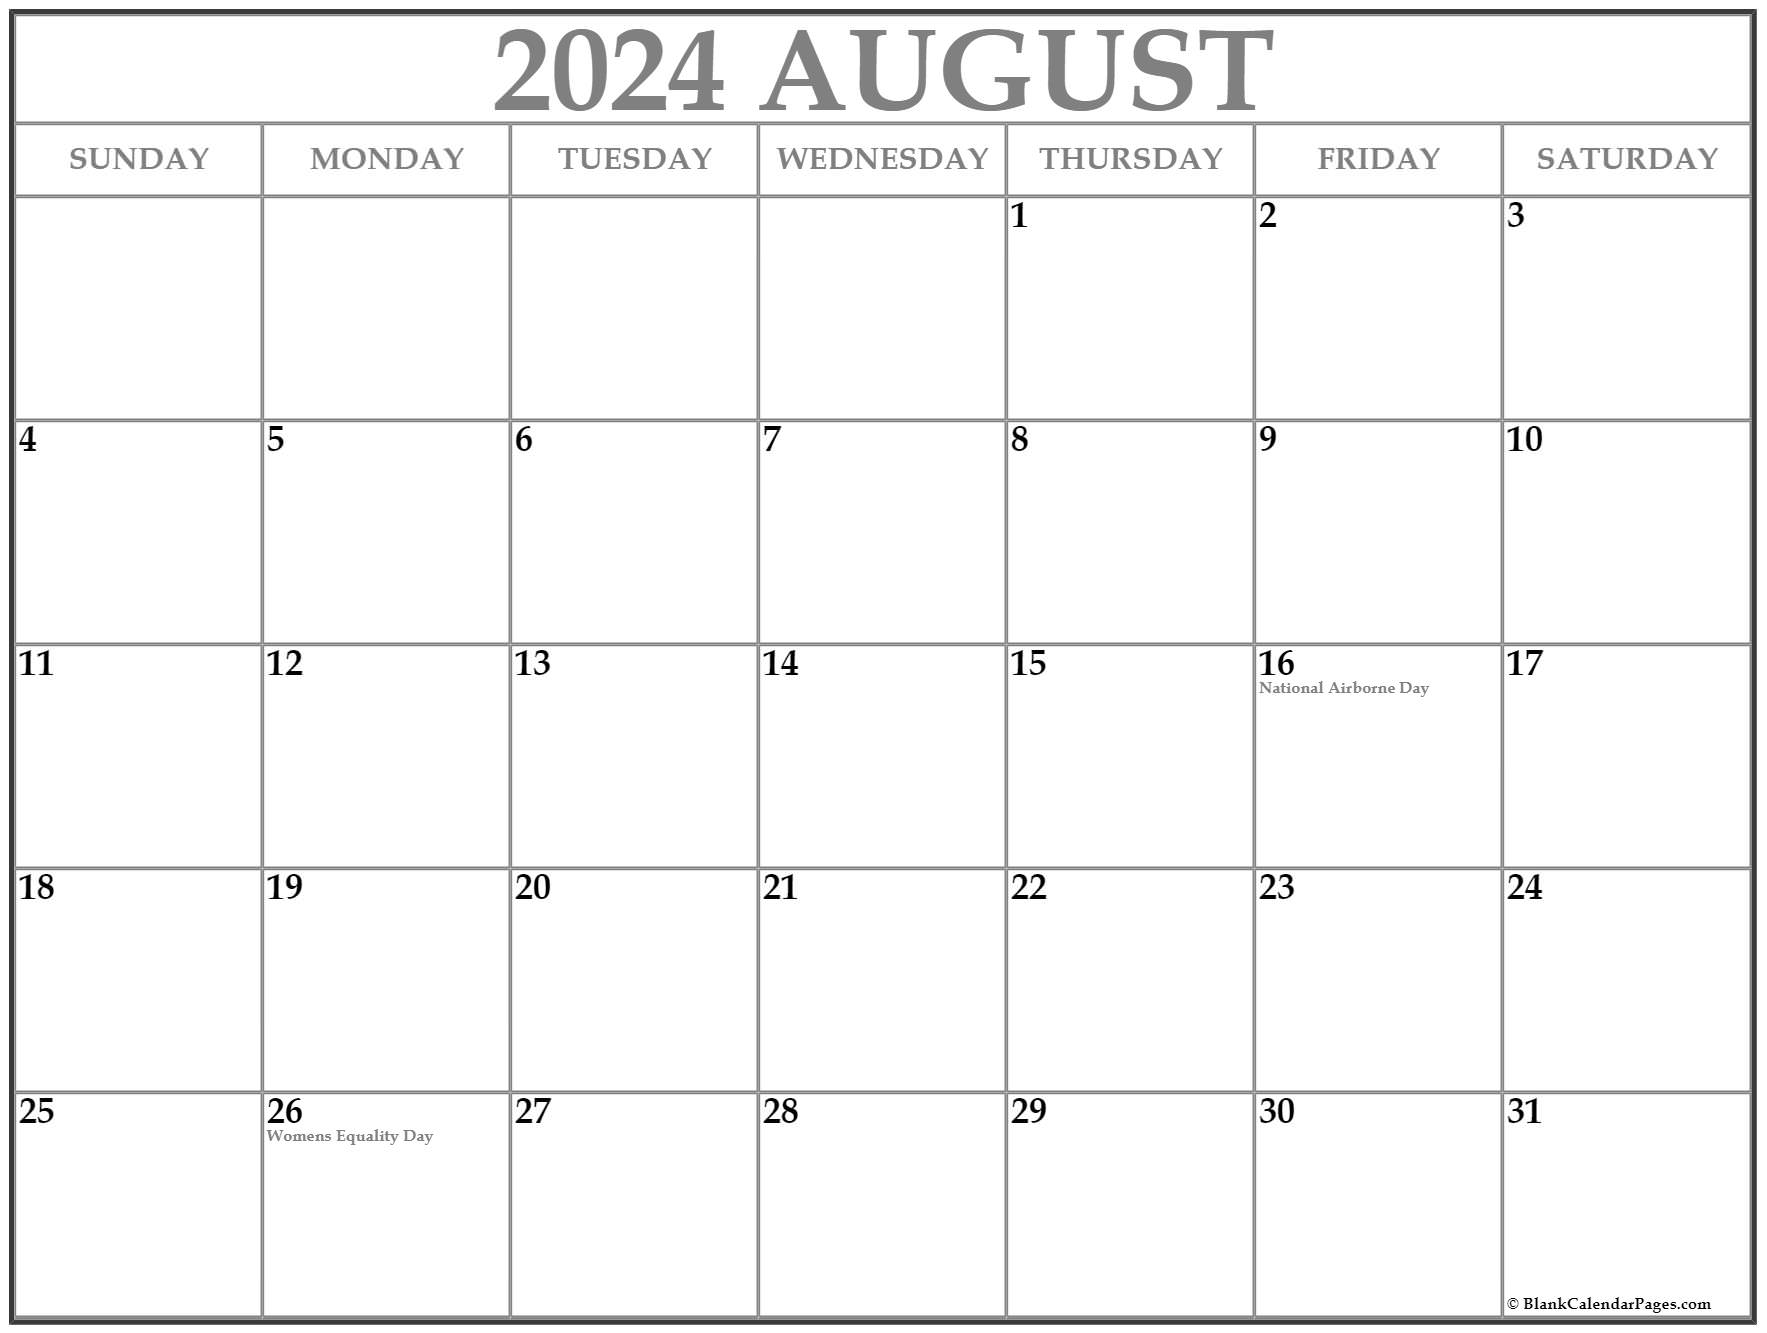 Collection Of August 2020 Calendars With Holidays